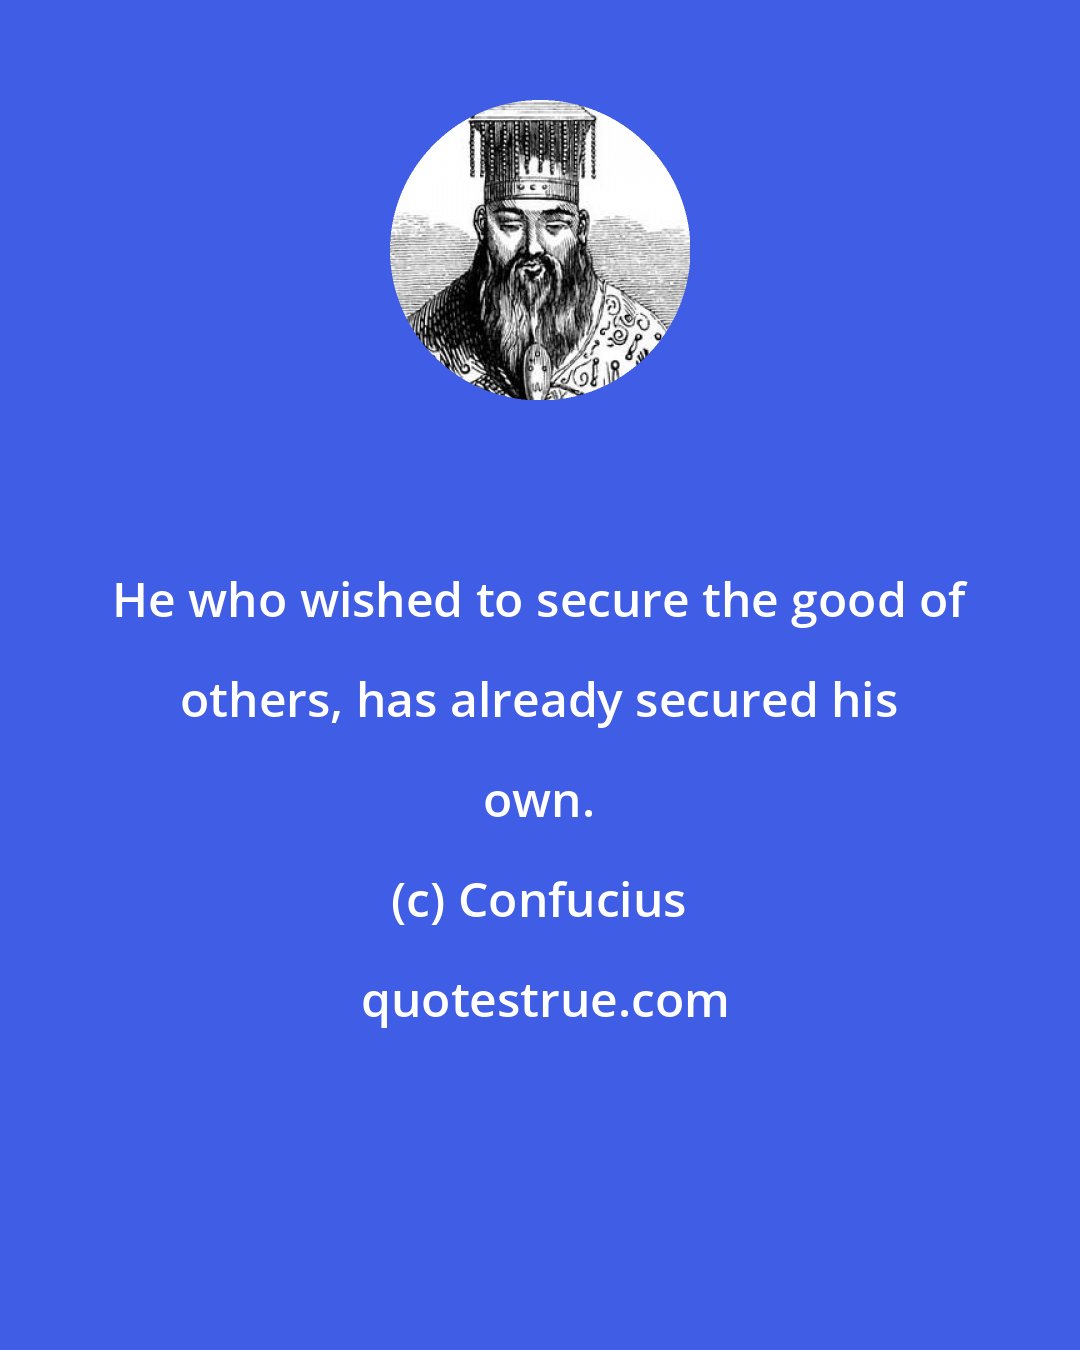 Confucius: He who wished to secure the good of others, has already secured his own.